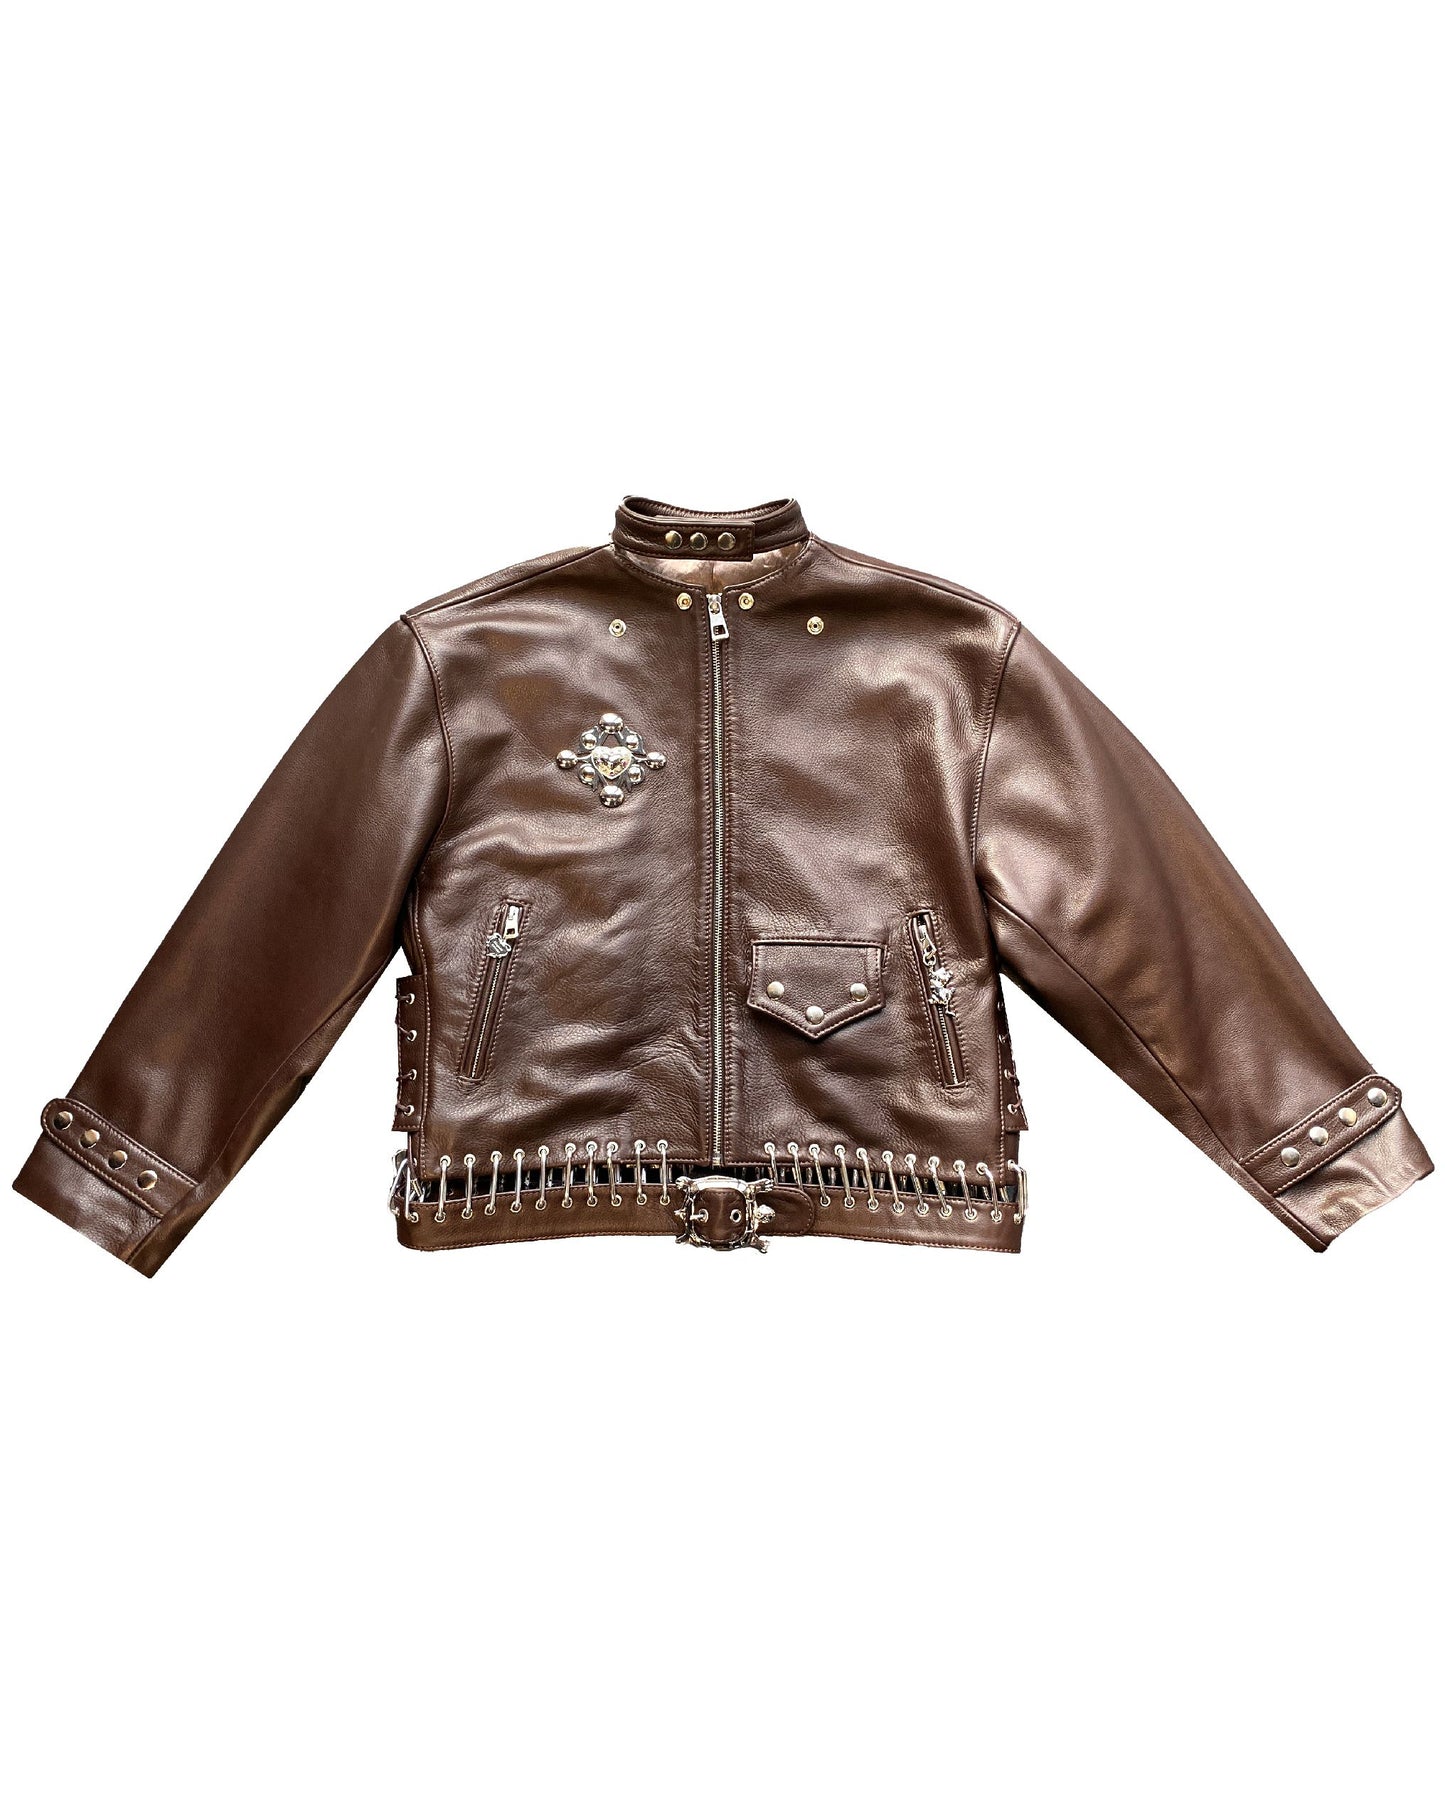 K-Point Leather Brown Jacket